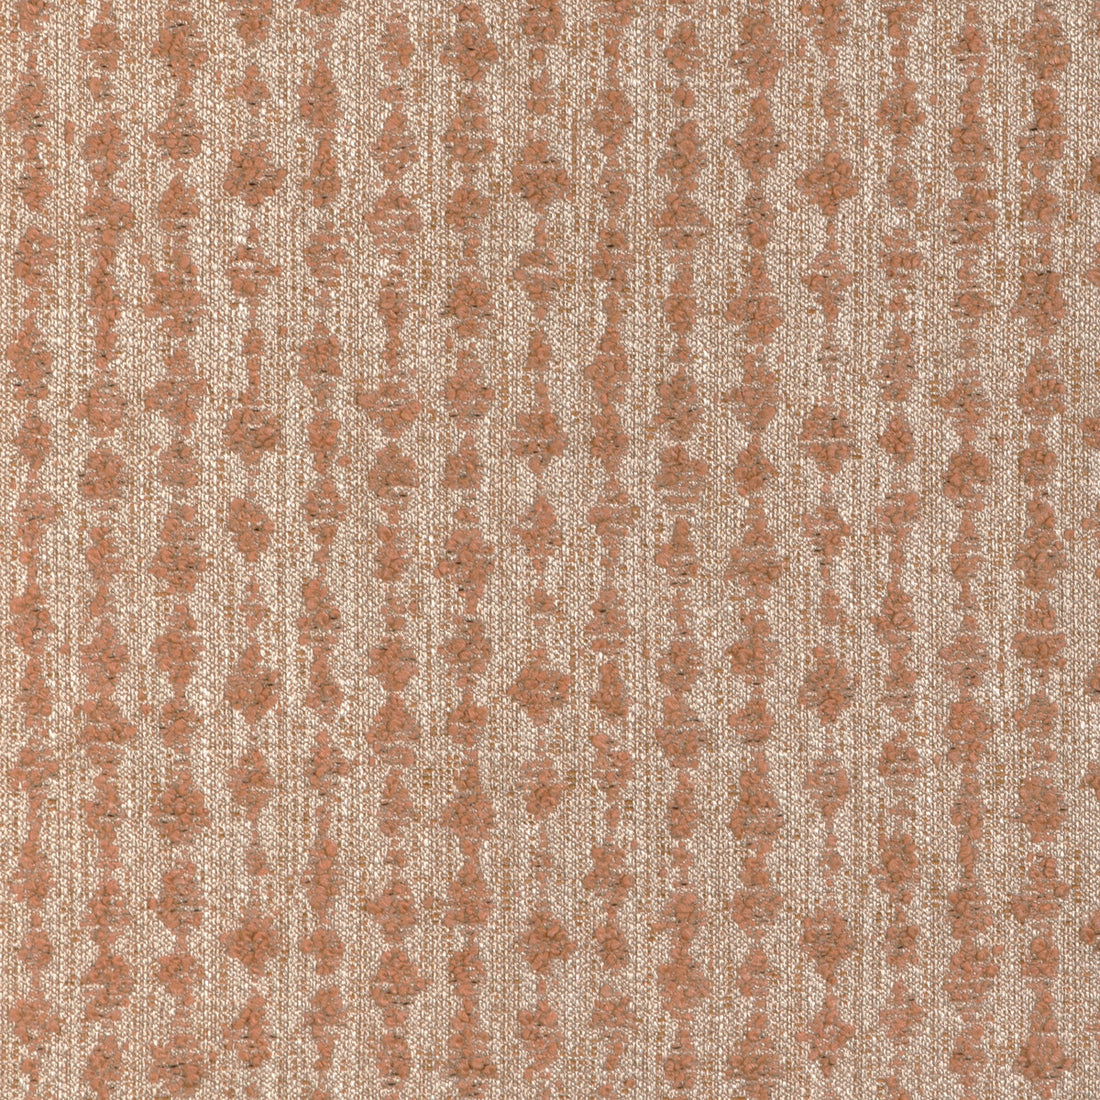 Serai fabric in spice color - pattern GWF-3795.1624.0 - by Lee Jofa Modern in the Kelly Wearstler VIII collection